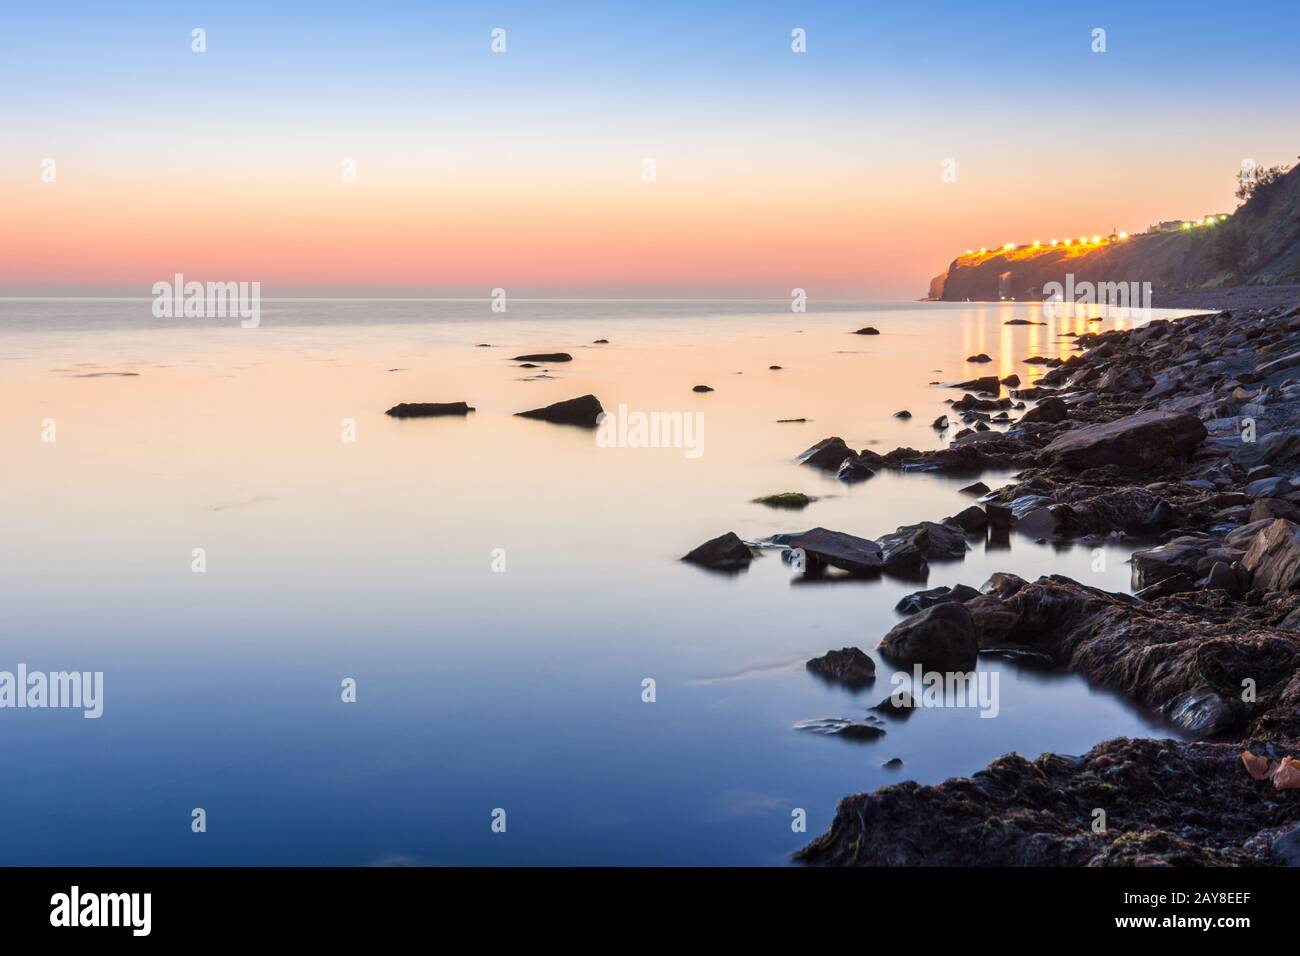 Quiet scenic landscape after sunset in the High Coast area of the resort town of Anapa, Russia Stock Photo